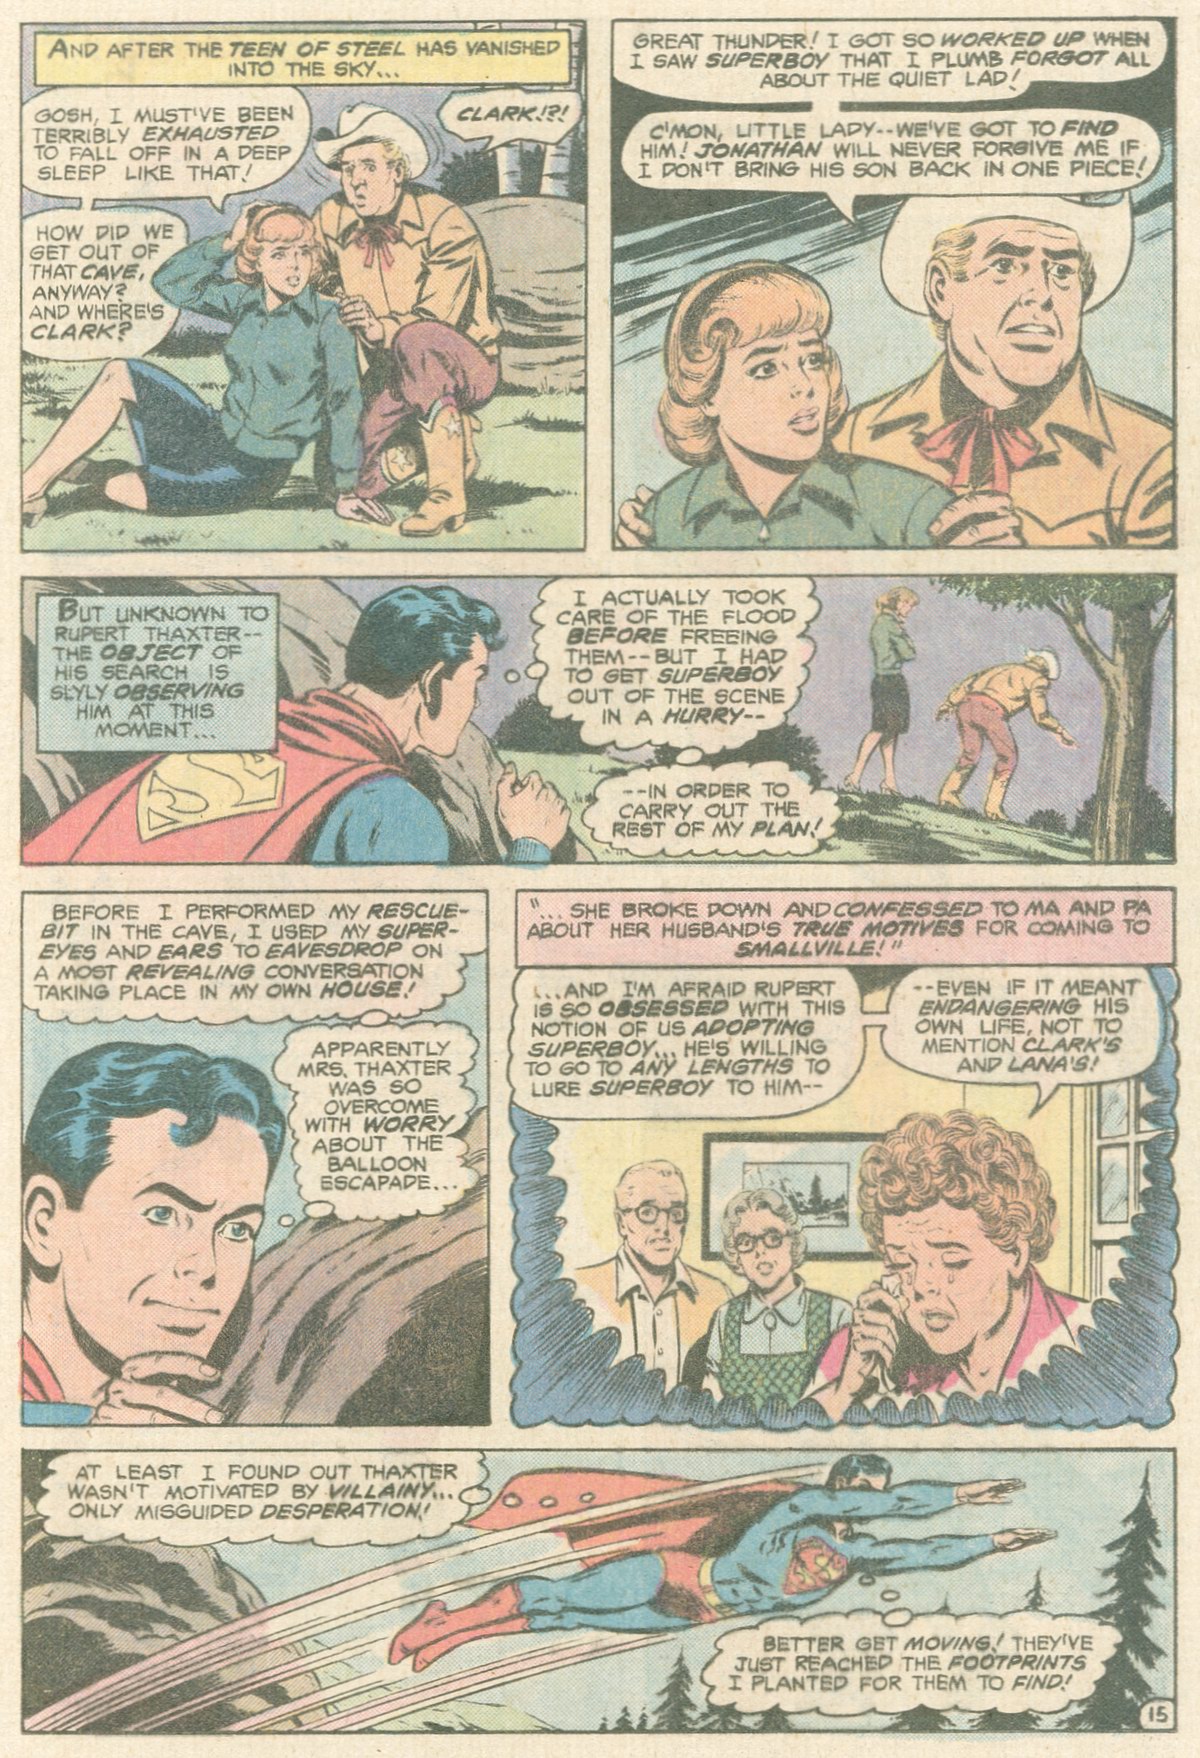 The New Adventures of Superboy 15 Page 15